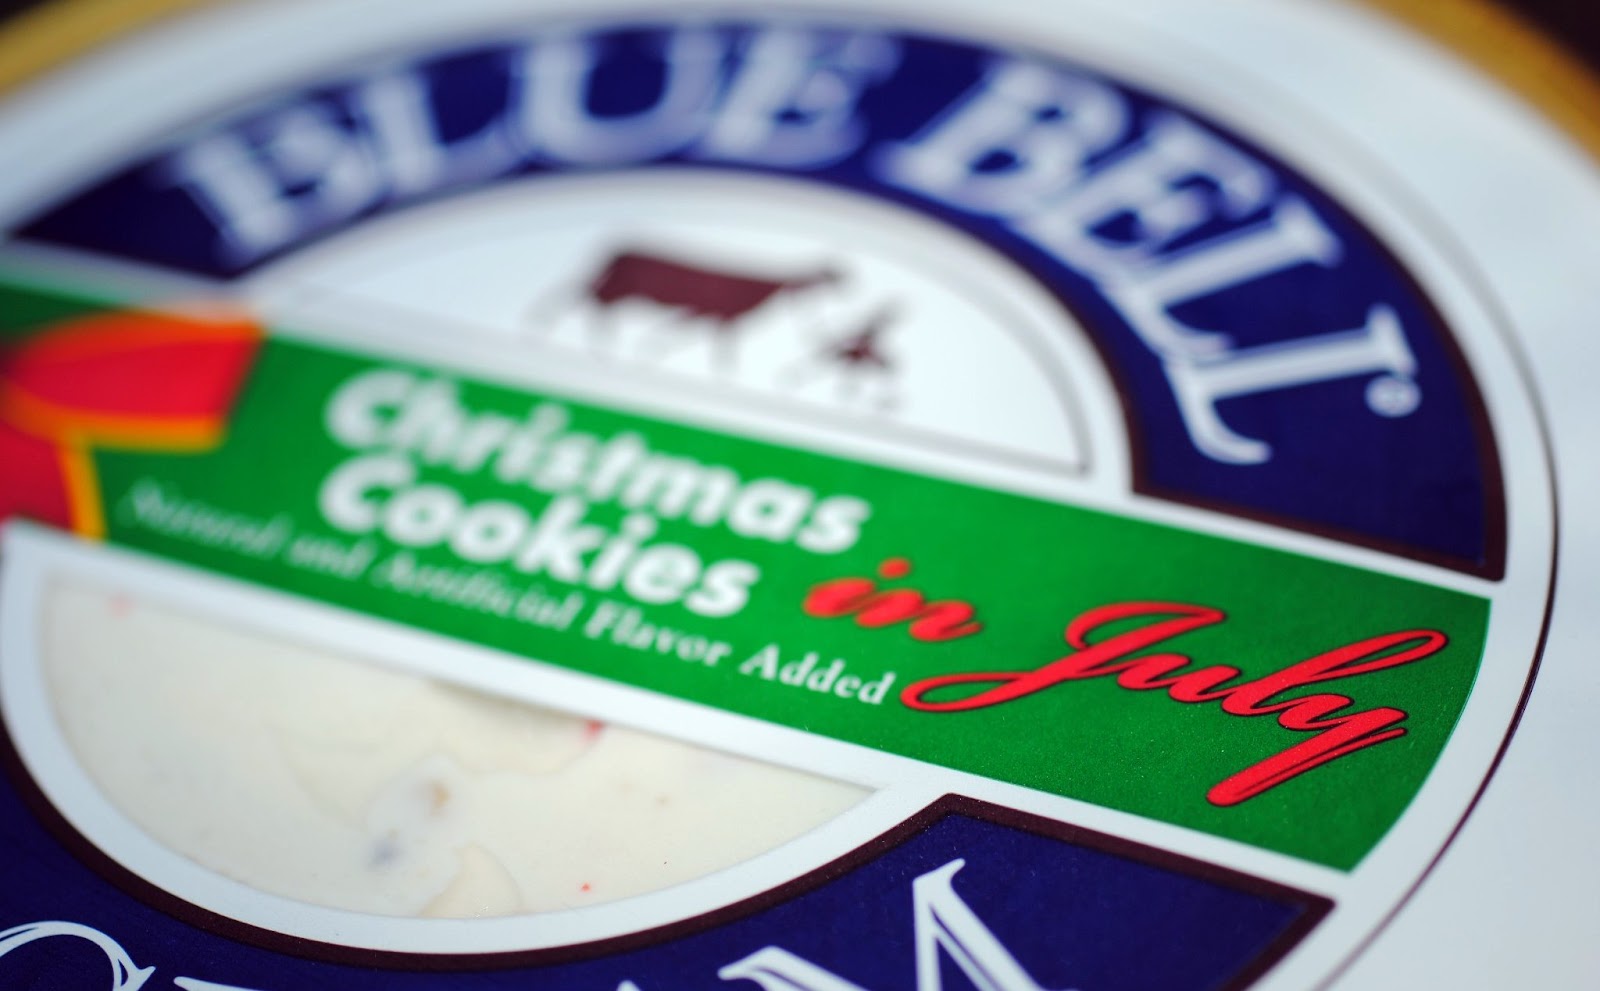 food and ice cream recipes: REVIEW: Blue Bell Christmas Cookies In July (Holiday Favorite ...